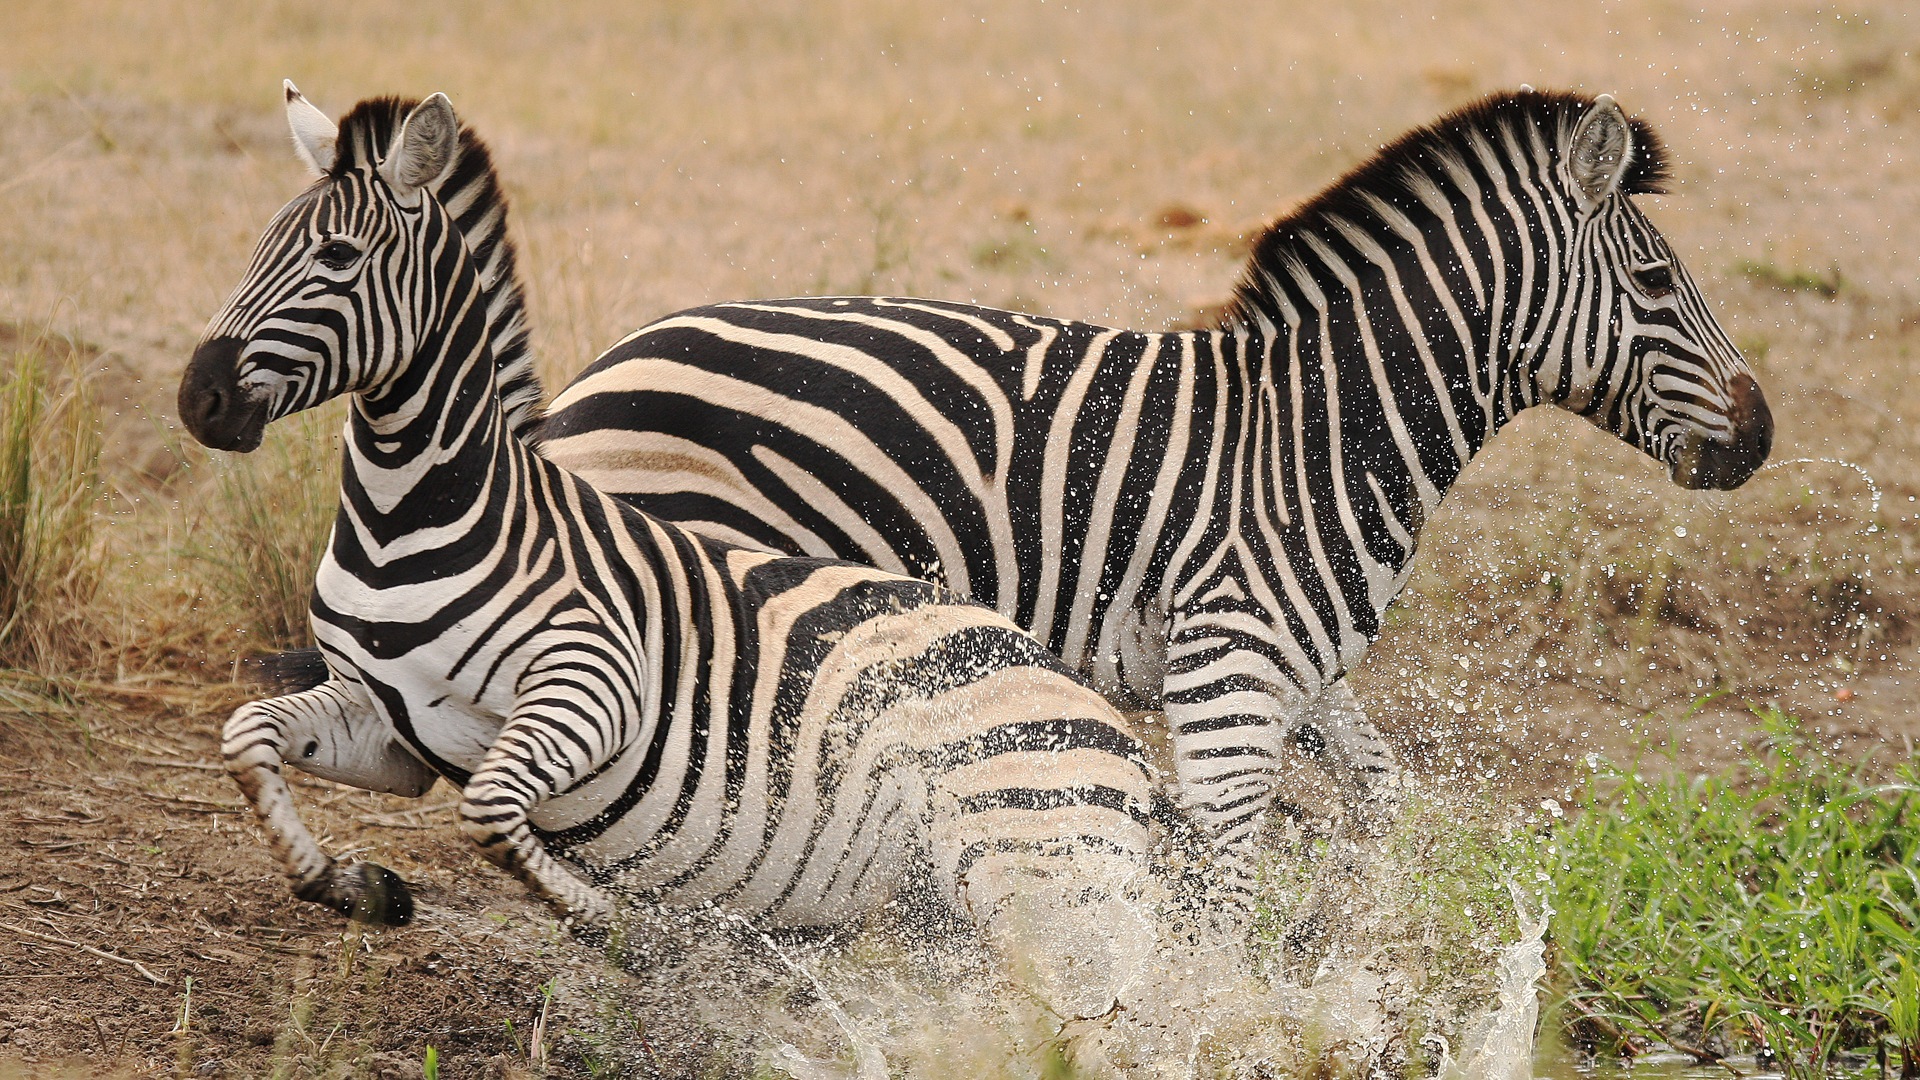 Black and white striped animal, zebra HD wallpapers #19 - 1920x1080